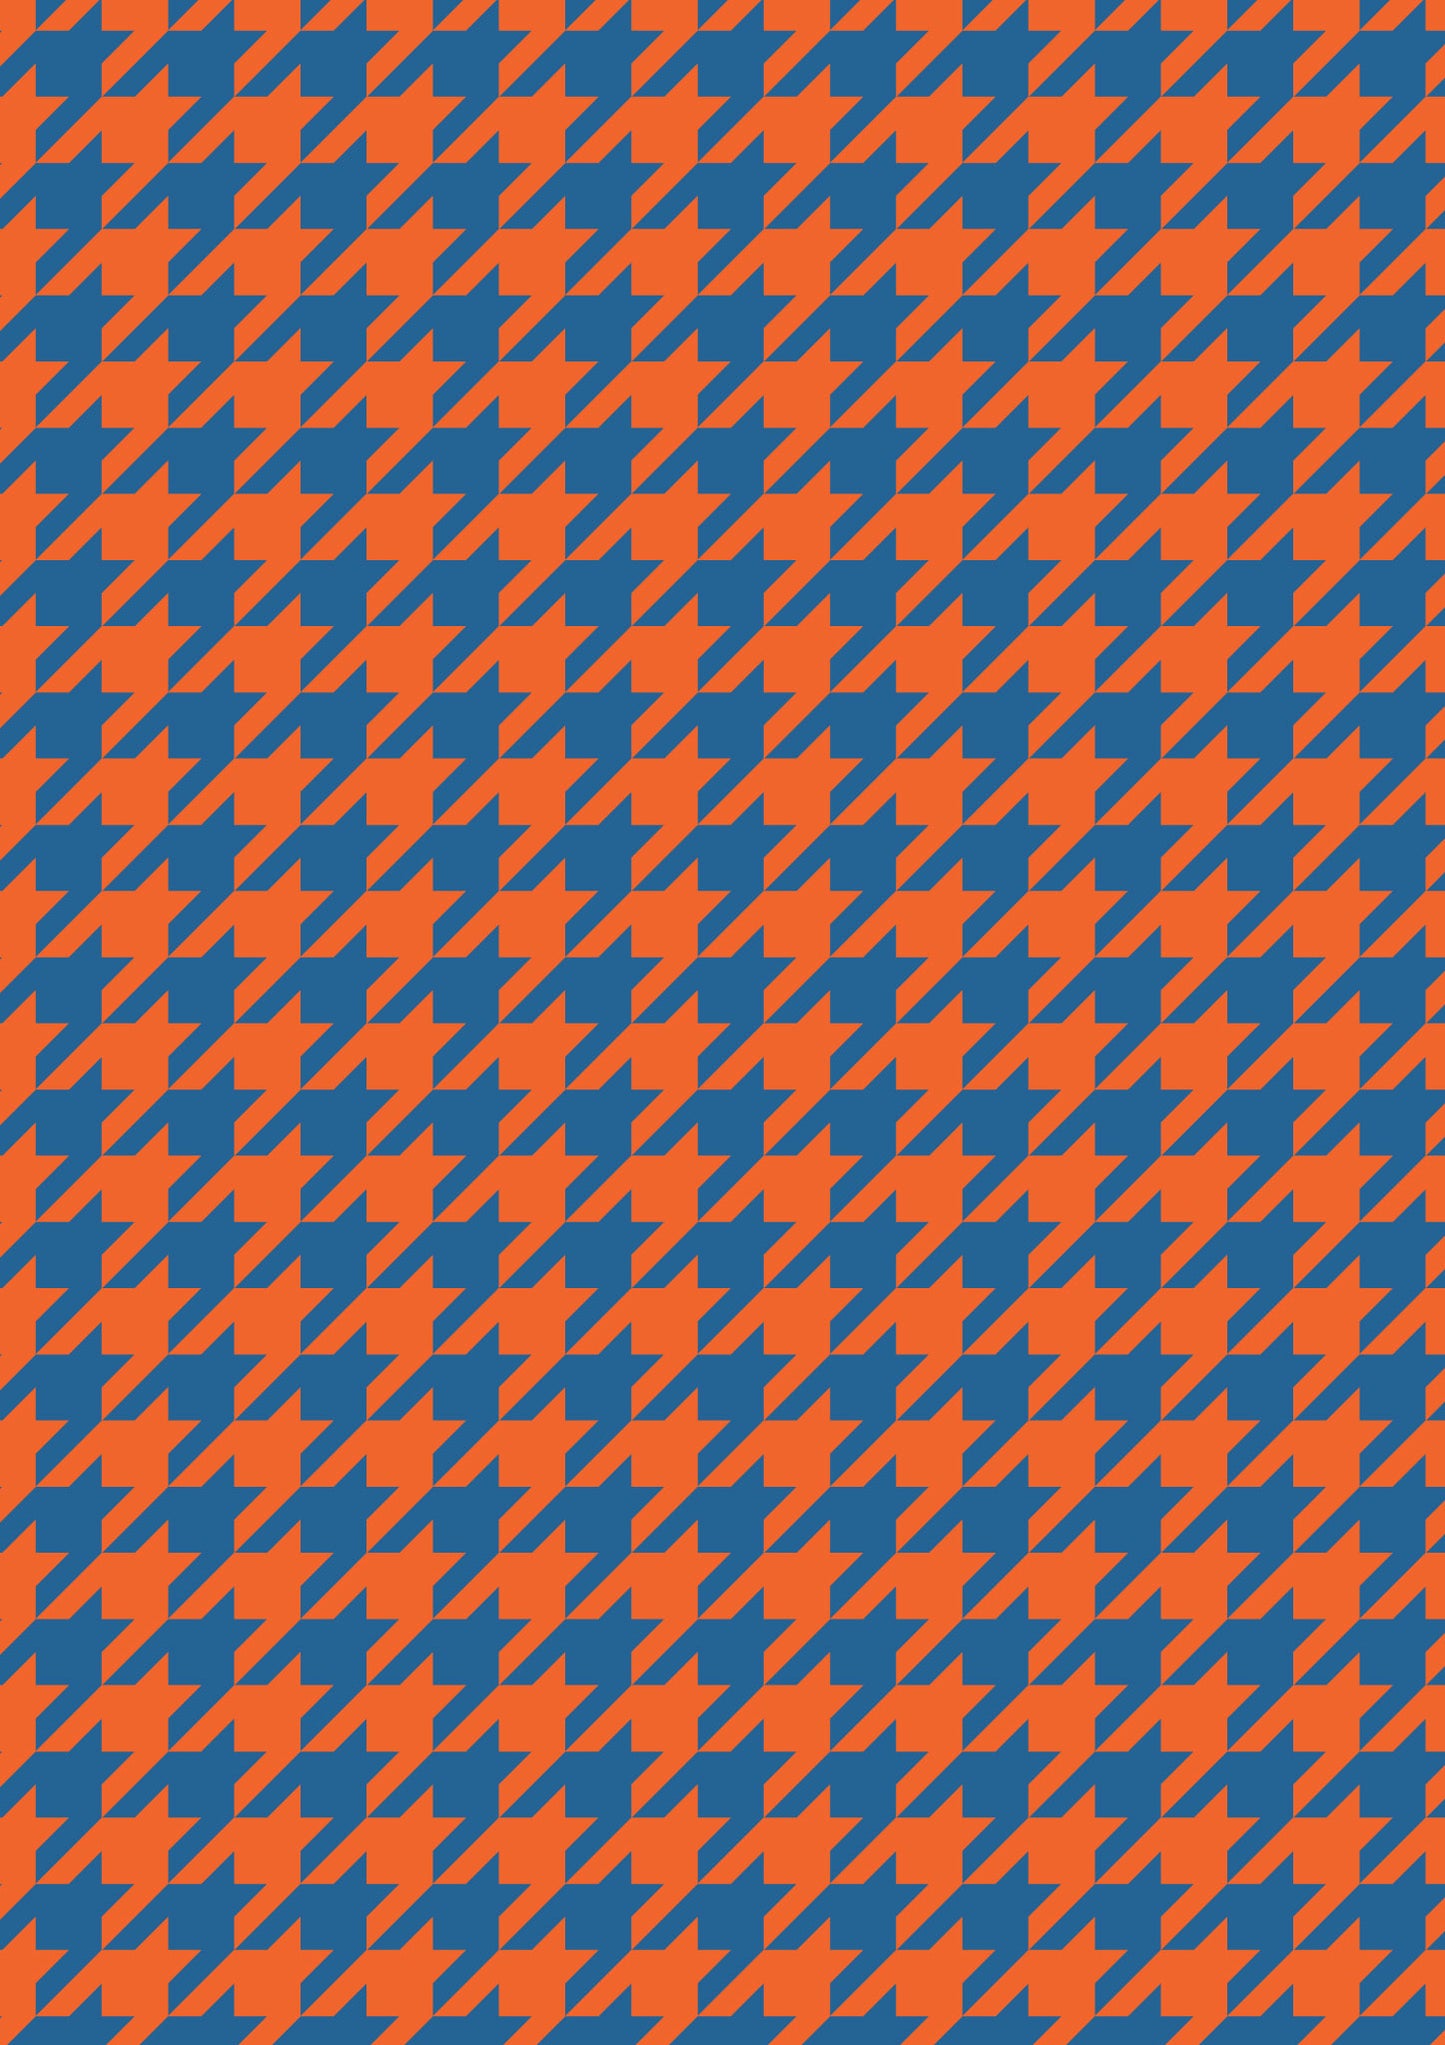 Orange and Blue A1 Photography Backdrop - Houndstooth